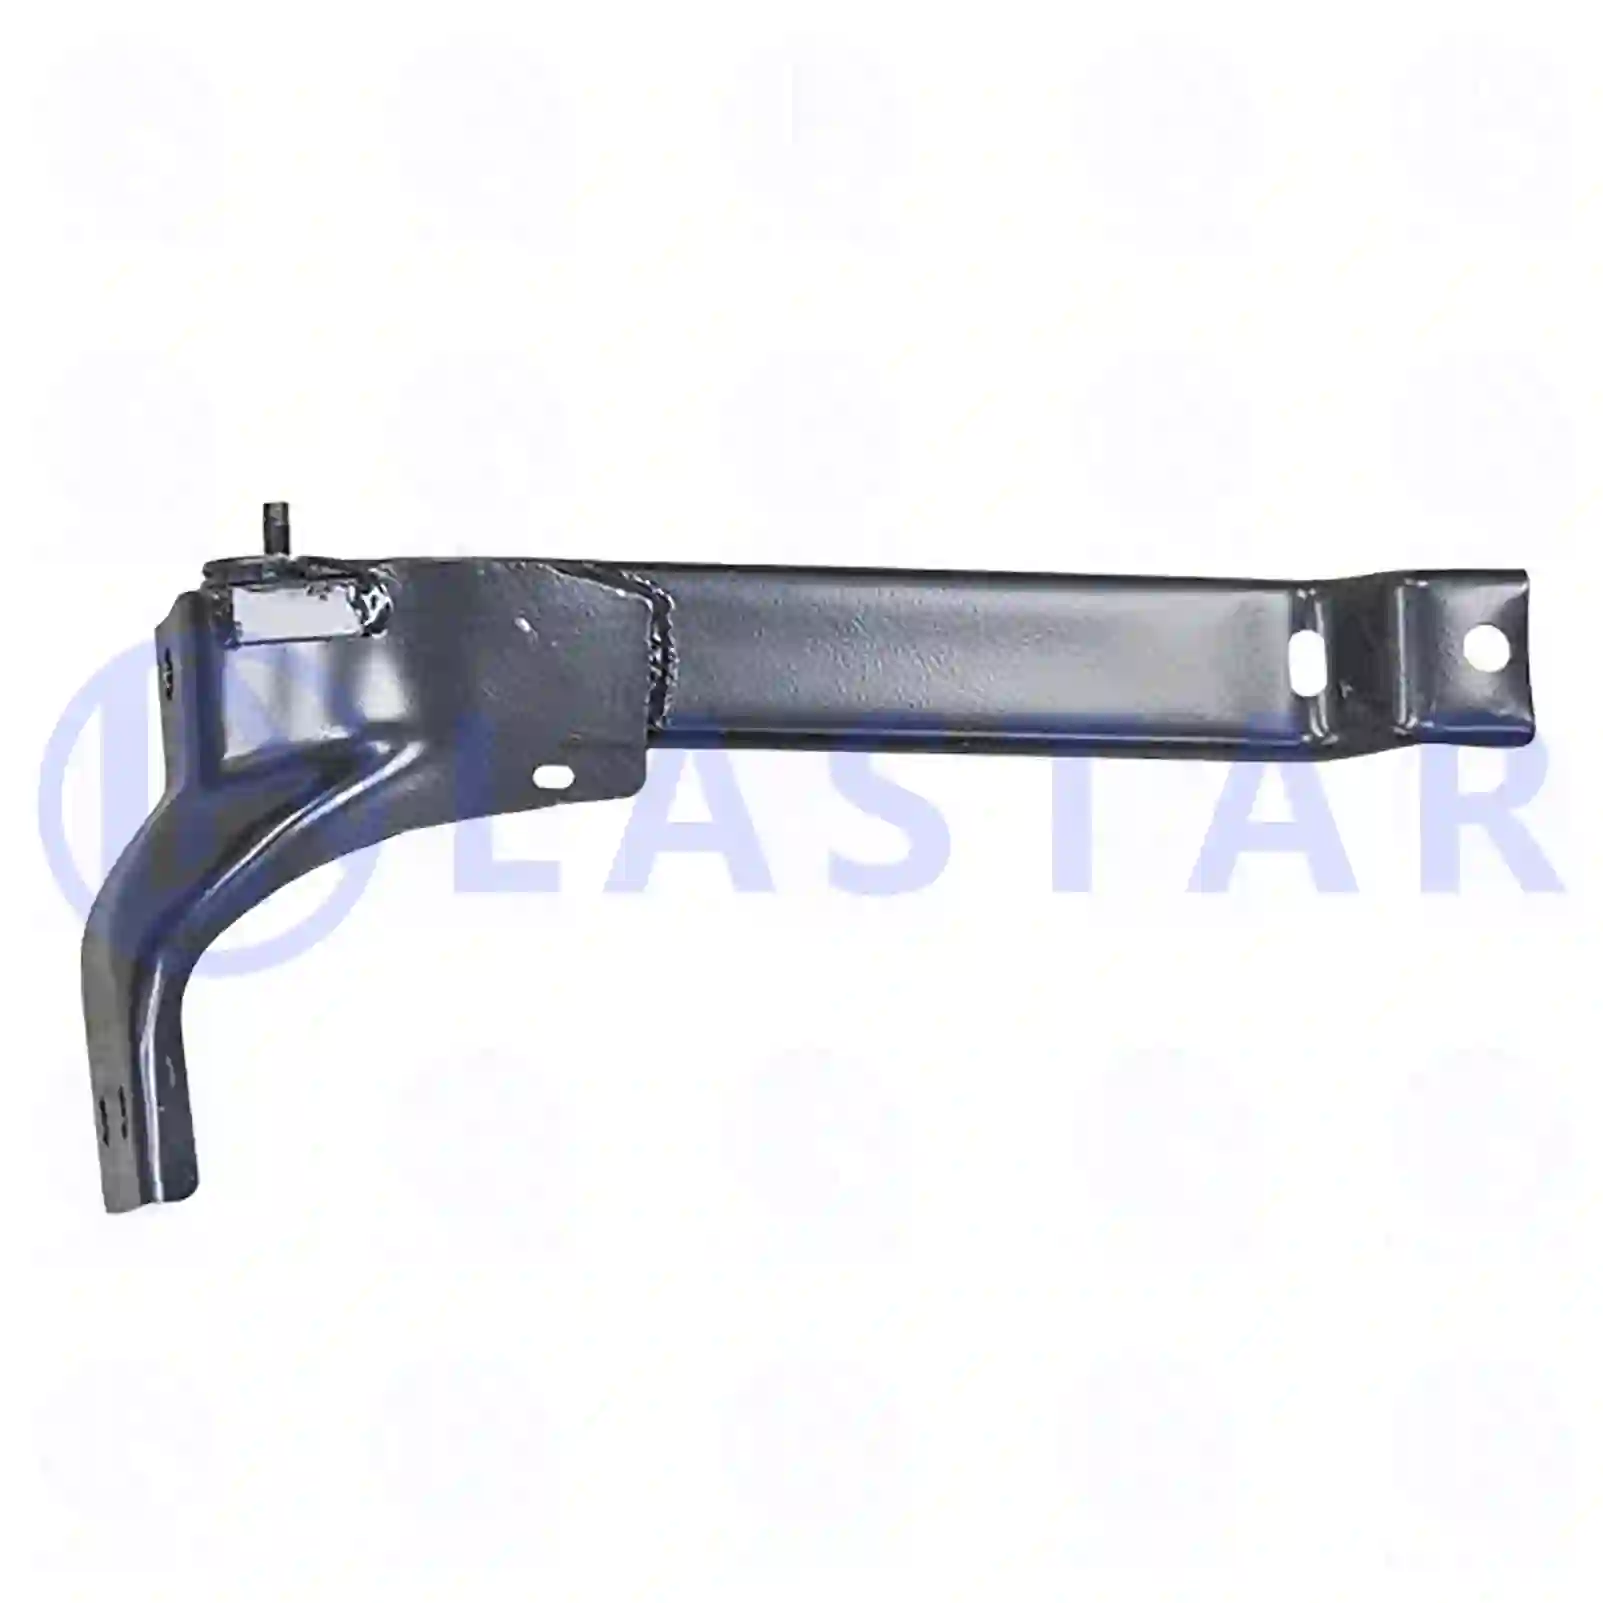 Bracket, step well case, right, 77721128, 20502239, ZG60063-0008 ||  77721128 Lastar Spare Part | Truck Spare Parts, Auotomotive Spare Parts Bracket, step well case, right, 77721128, 20502239, ZG60063-0008 ||  77721128 Lastar Spare Part | Truck Spare Parts, Auotomotive Spare Parts